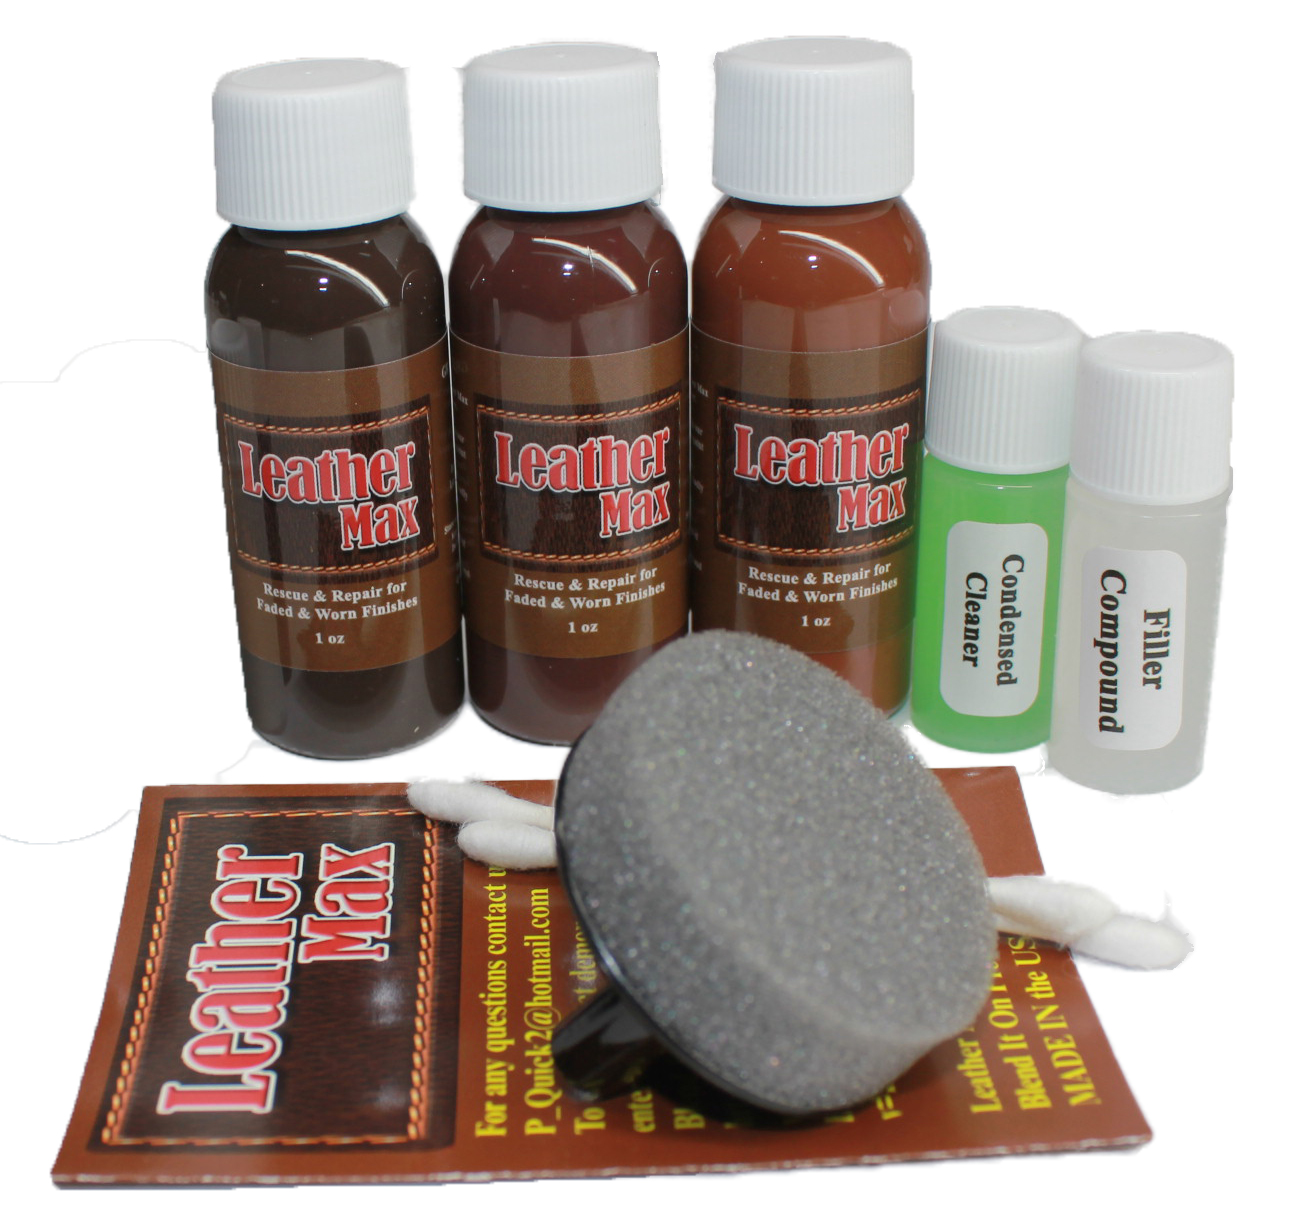 Leather Repair and Refinish for Handbags / Shoes / Boots / Jackets / Leather Max (Double Blacks) - image 1 of 5